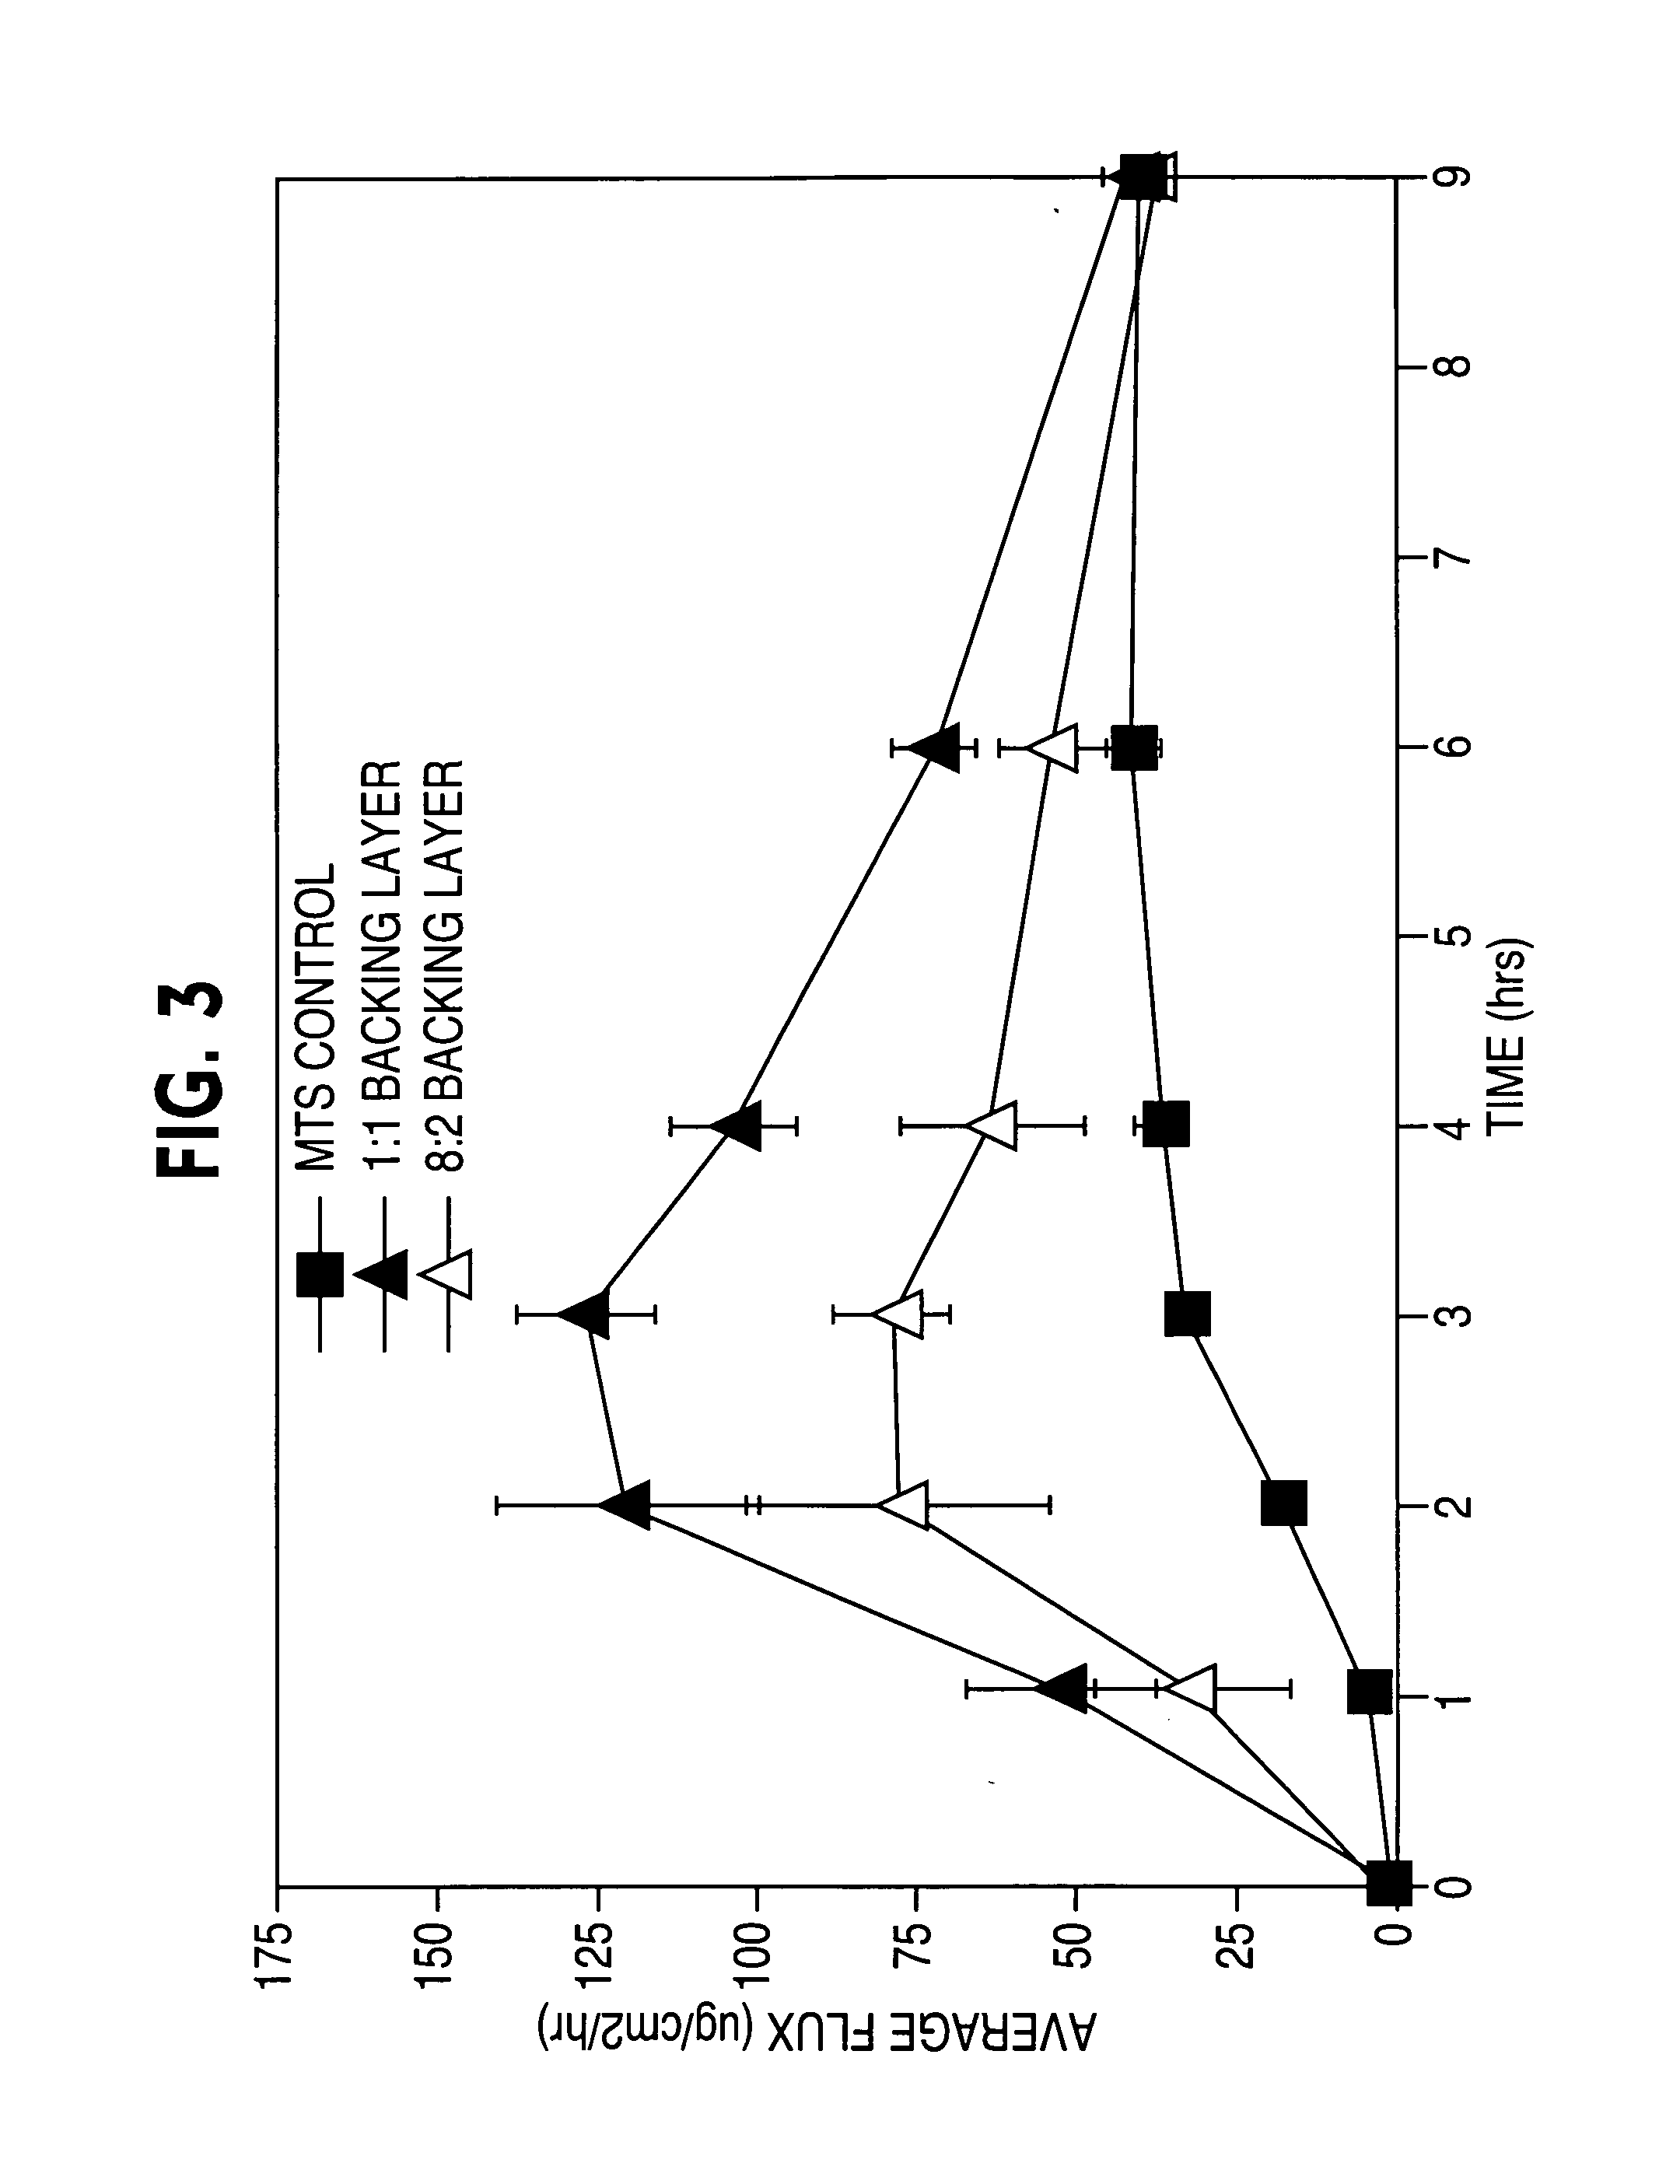 Compositions and methods for controlling drug loss and delivery in transdermal drug delivery systems